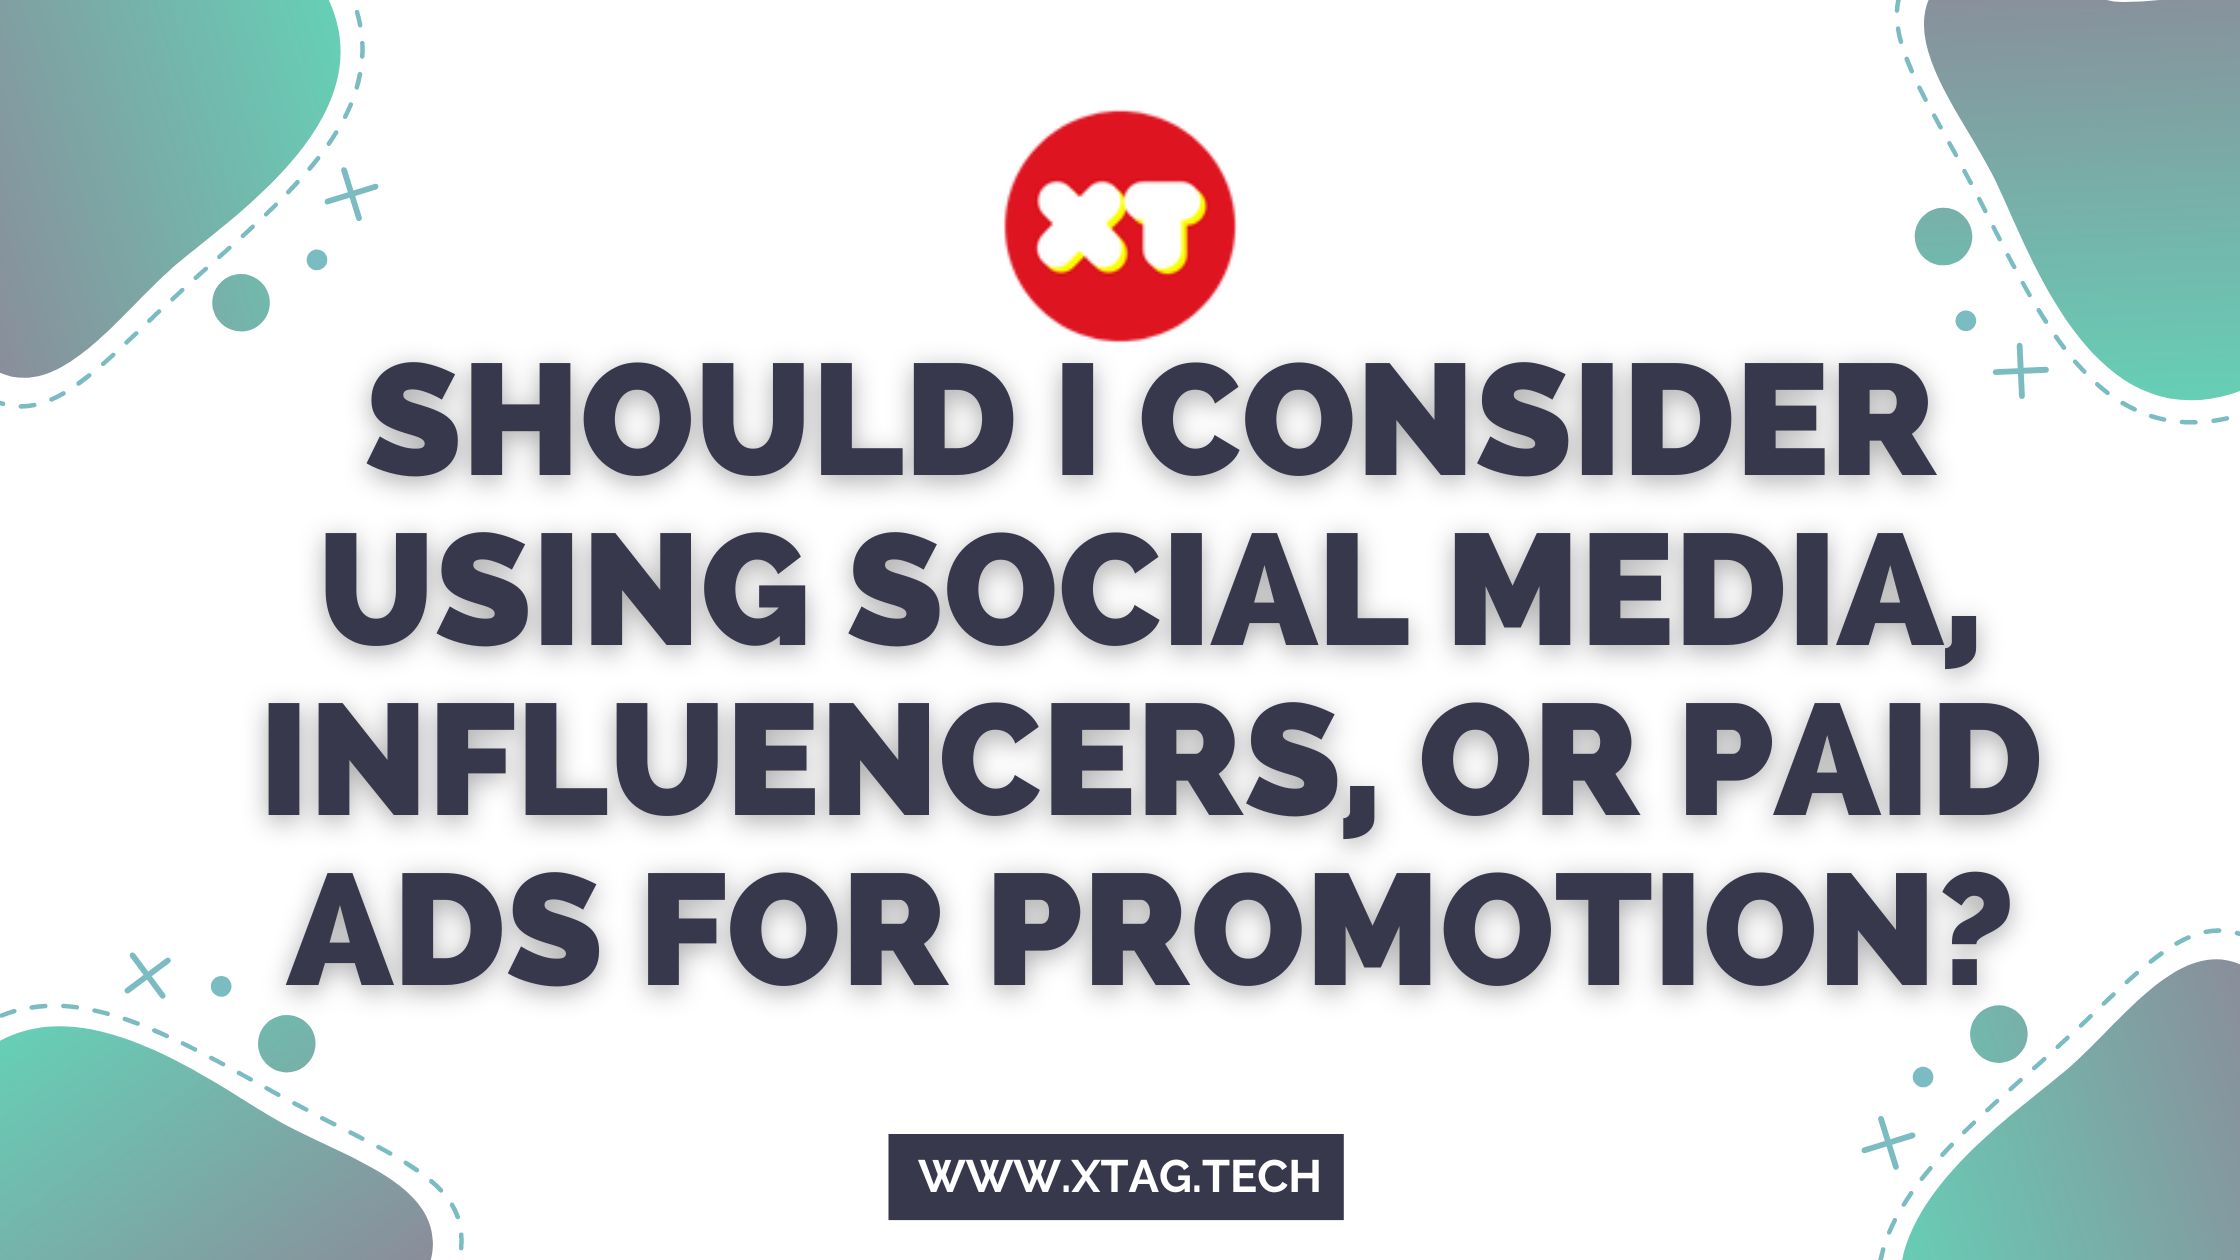 Should I Consider Using Social Media, Influencers, Or Paid Ads For Promotion?